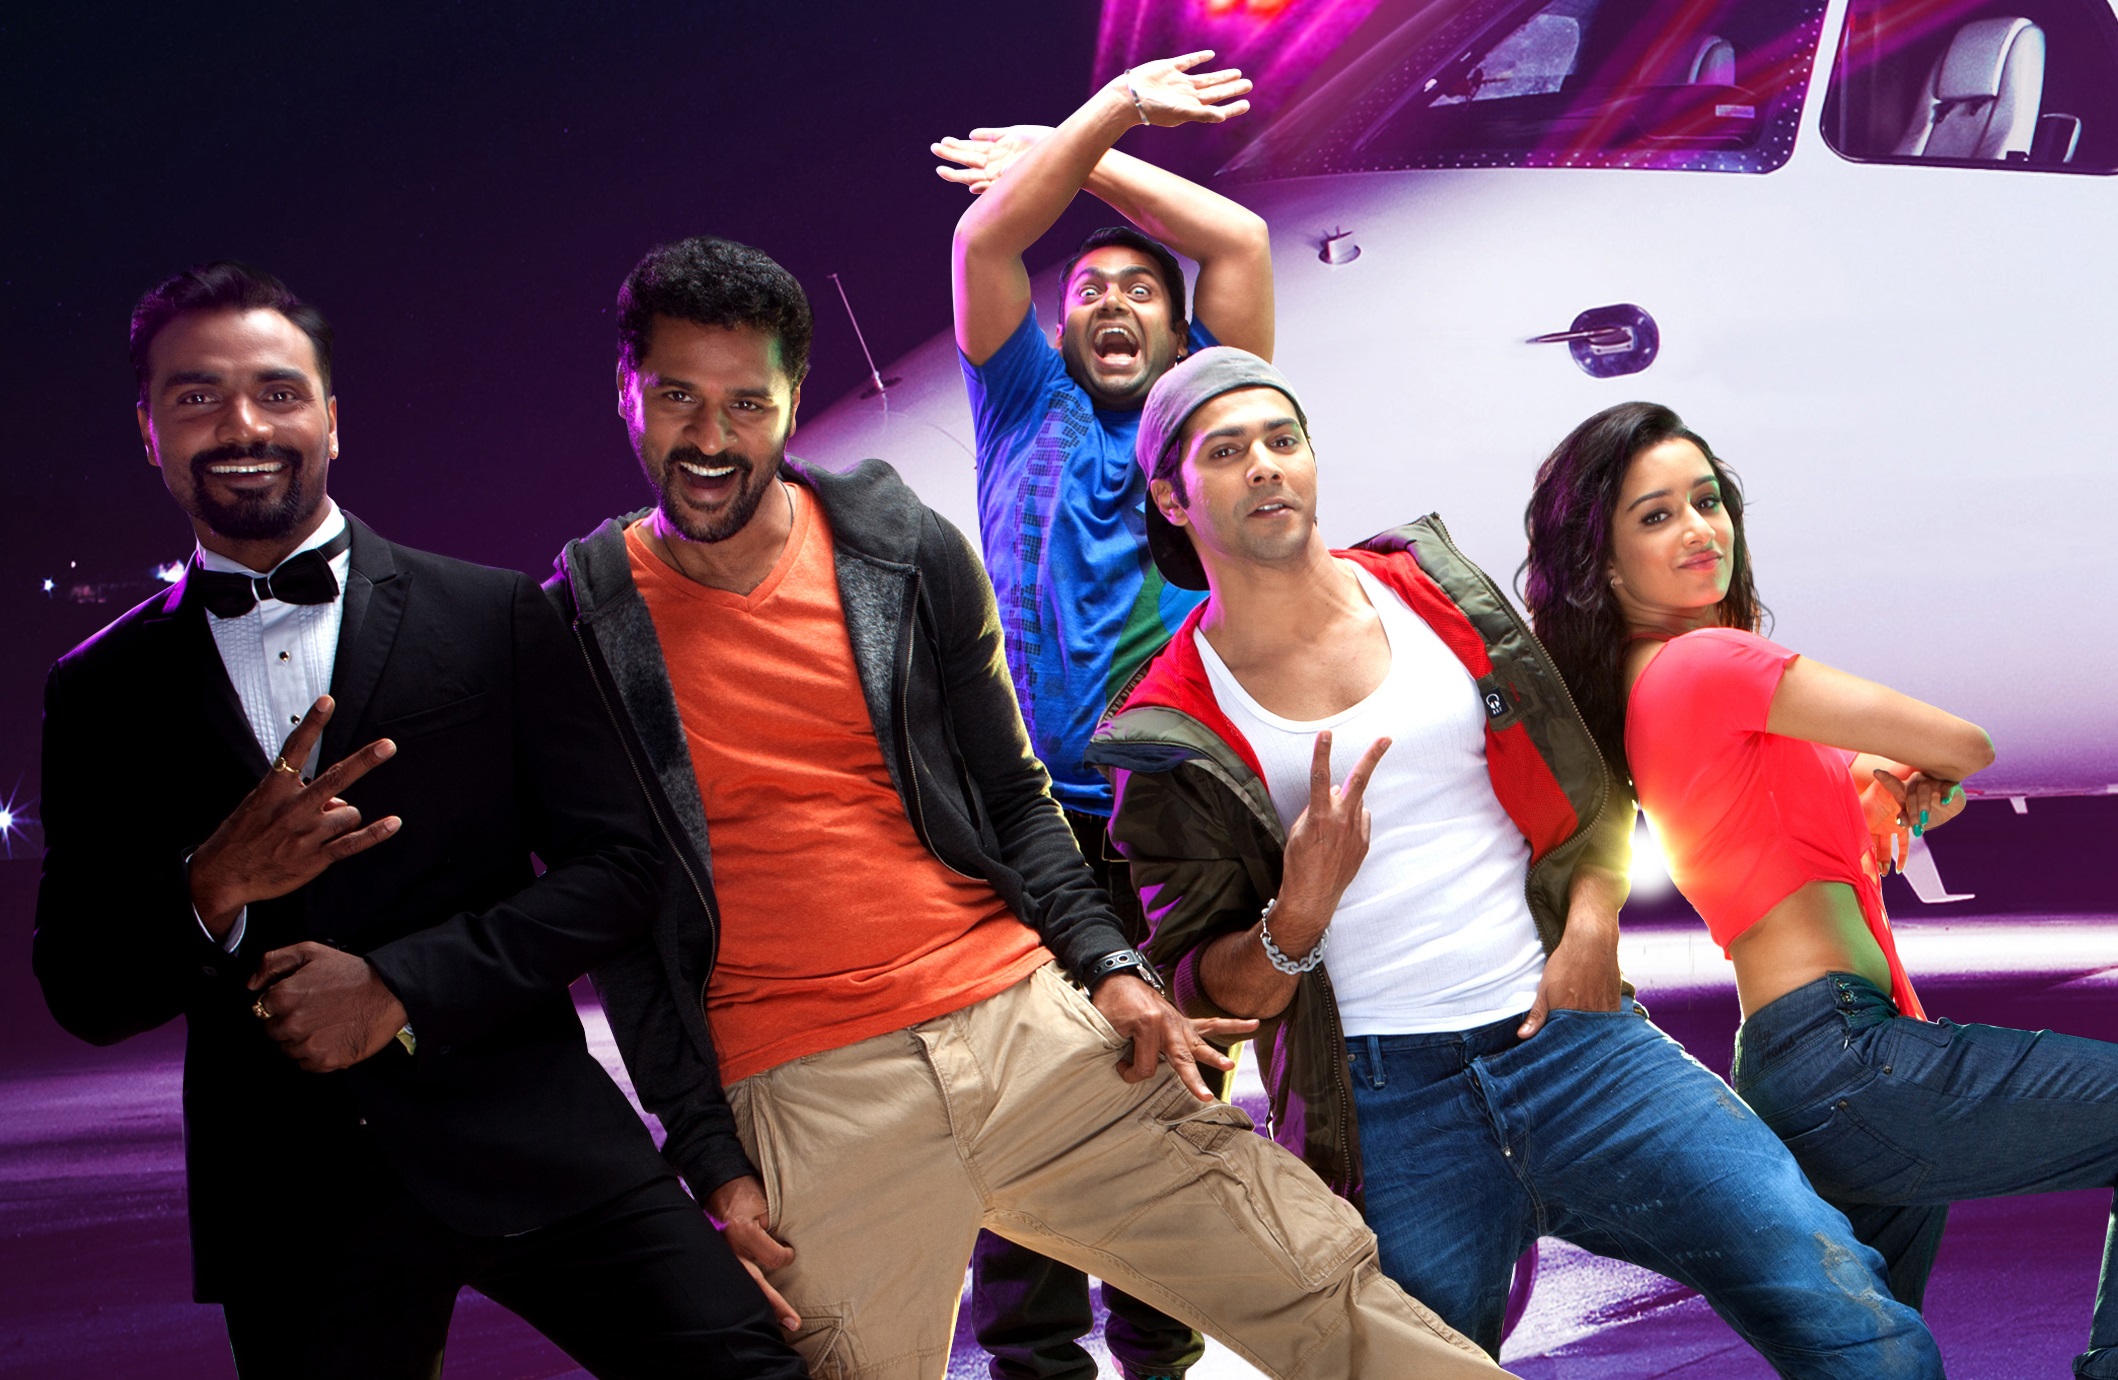 ABCD 2 based on dance